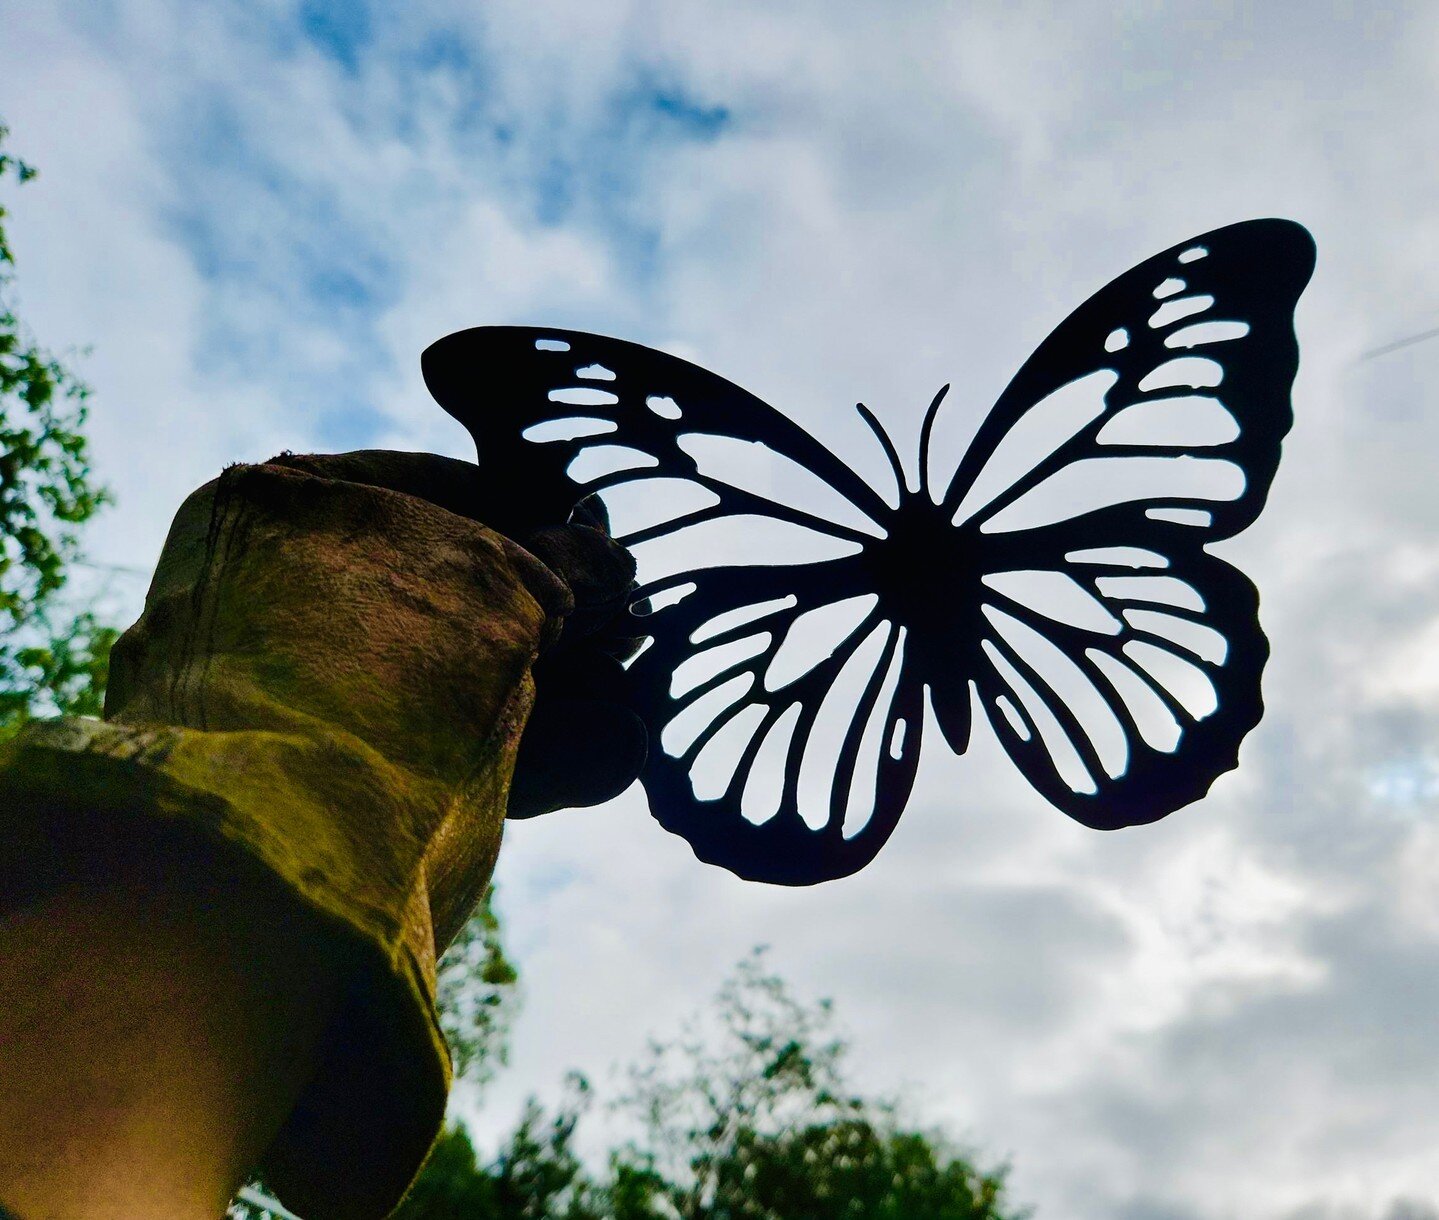 May or may not be inspired but The Hungry Hungry Caterpillar&hellip; 

#nannup #flower #garden #festival #gardening #sculpture #gardenart #metalart #art #metal #welding #tulip #southwest #busselton #dunsborough #margaretriver #steel #butterfly #paint